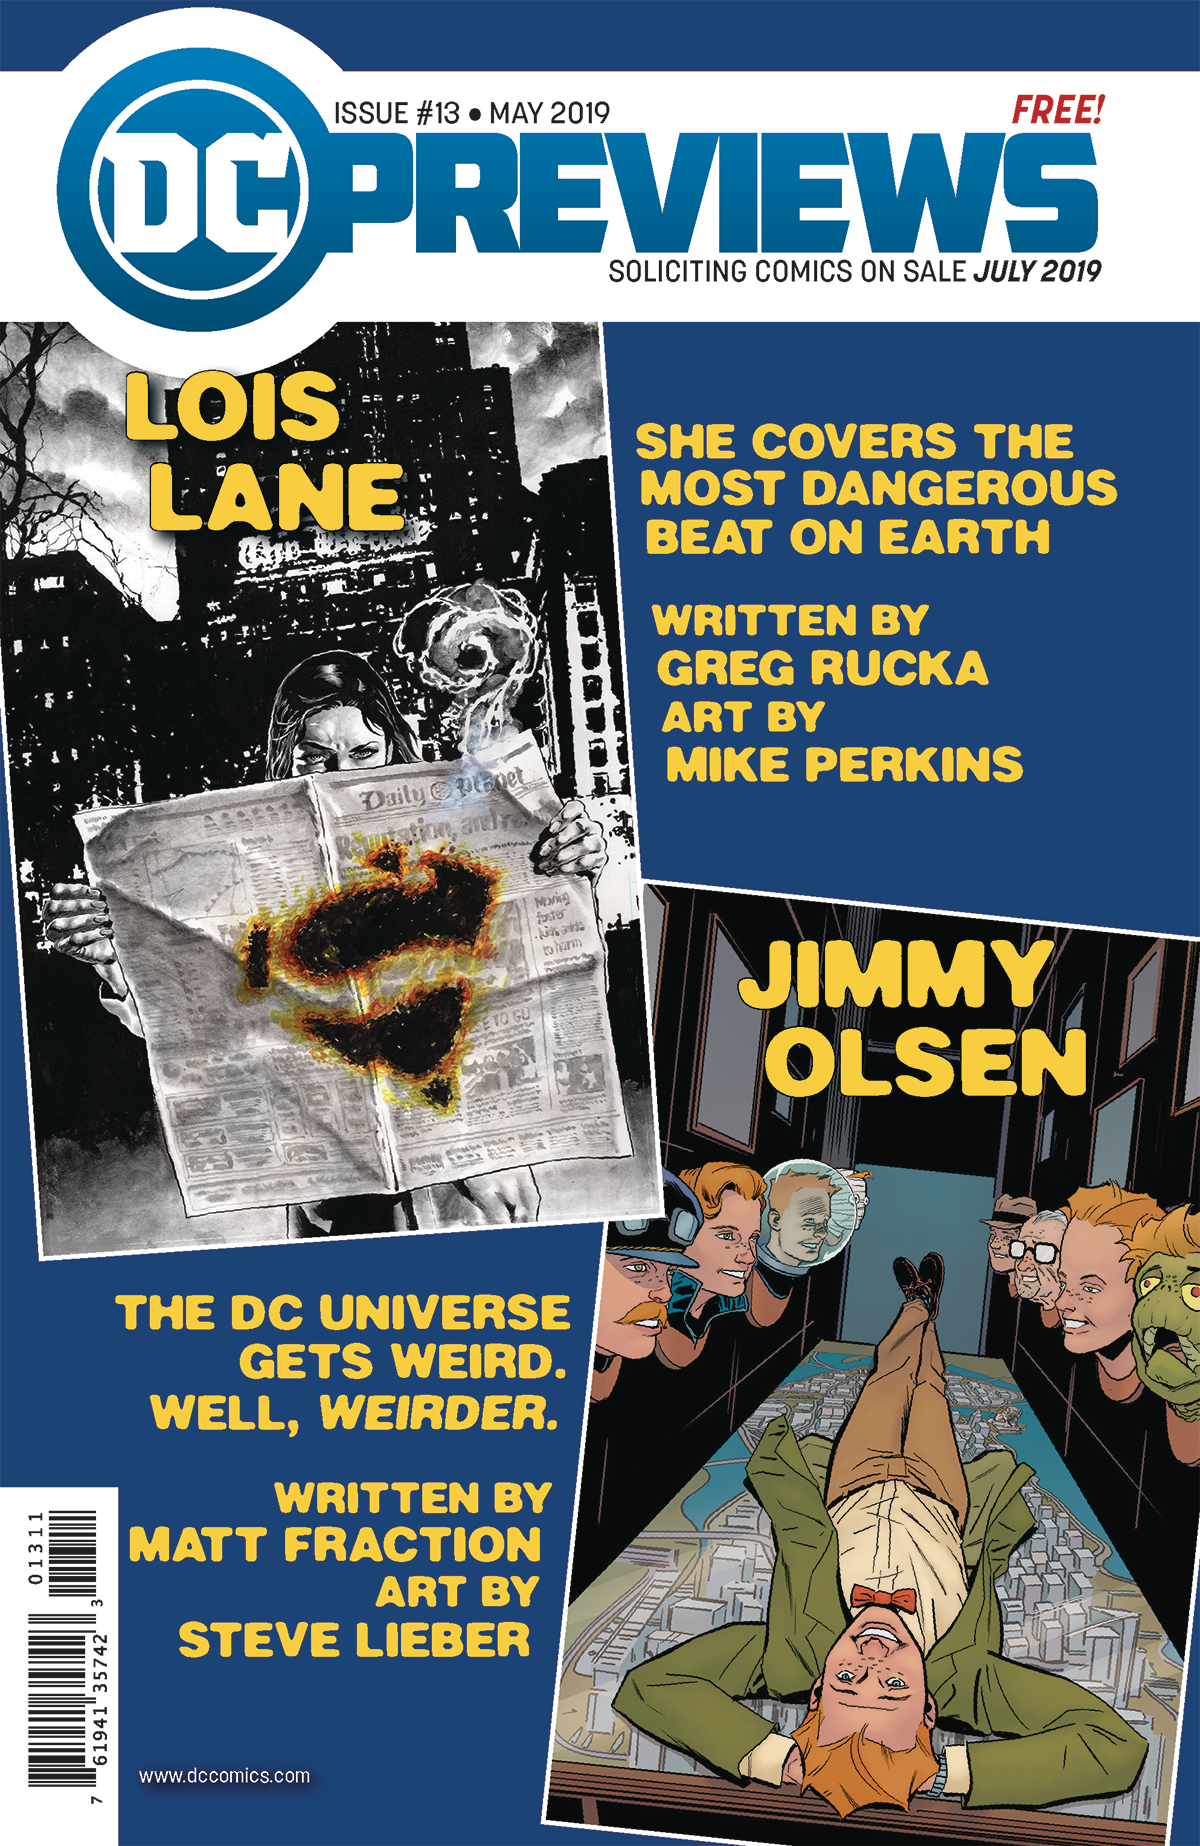 DC PREVIEWS #13 MAY 2019 EXTRAS